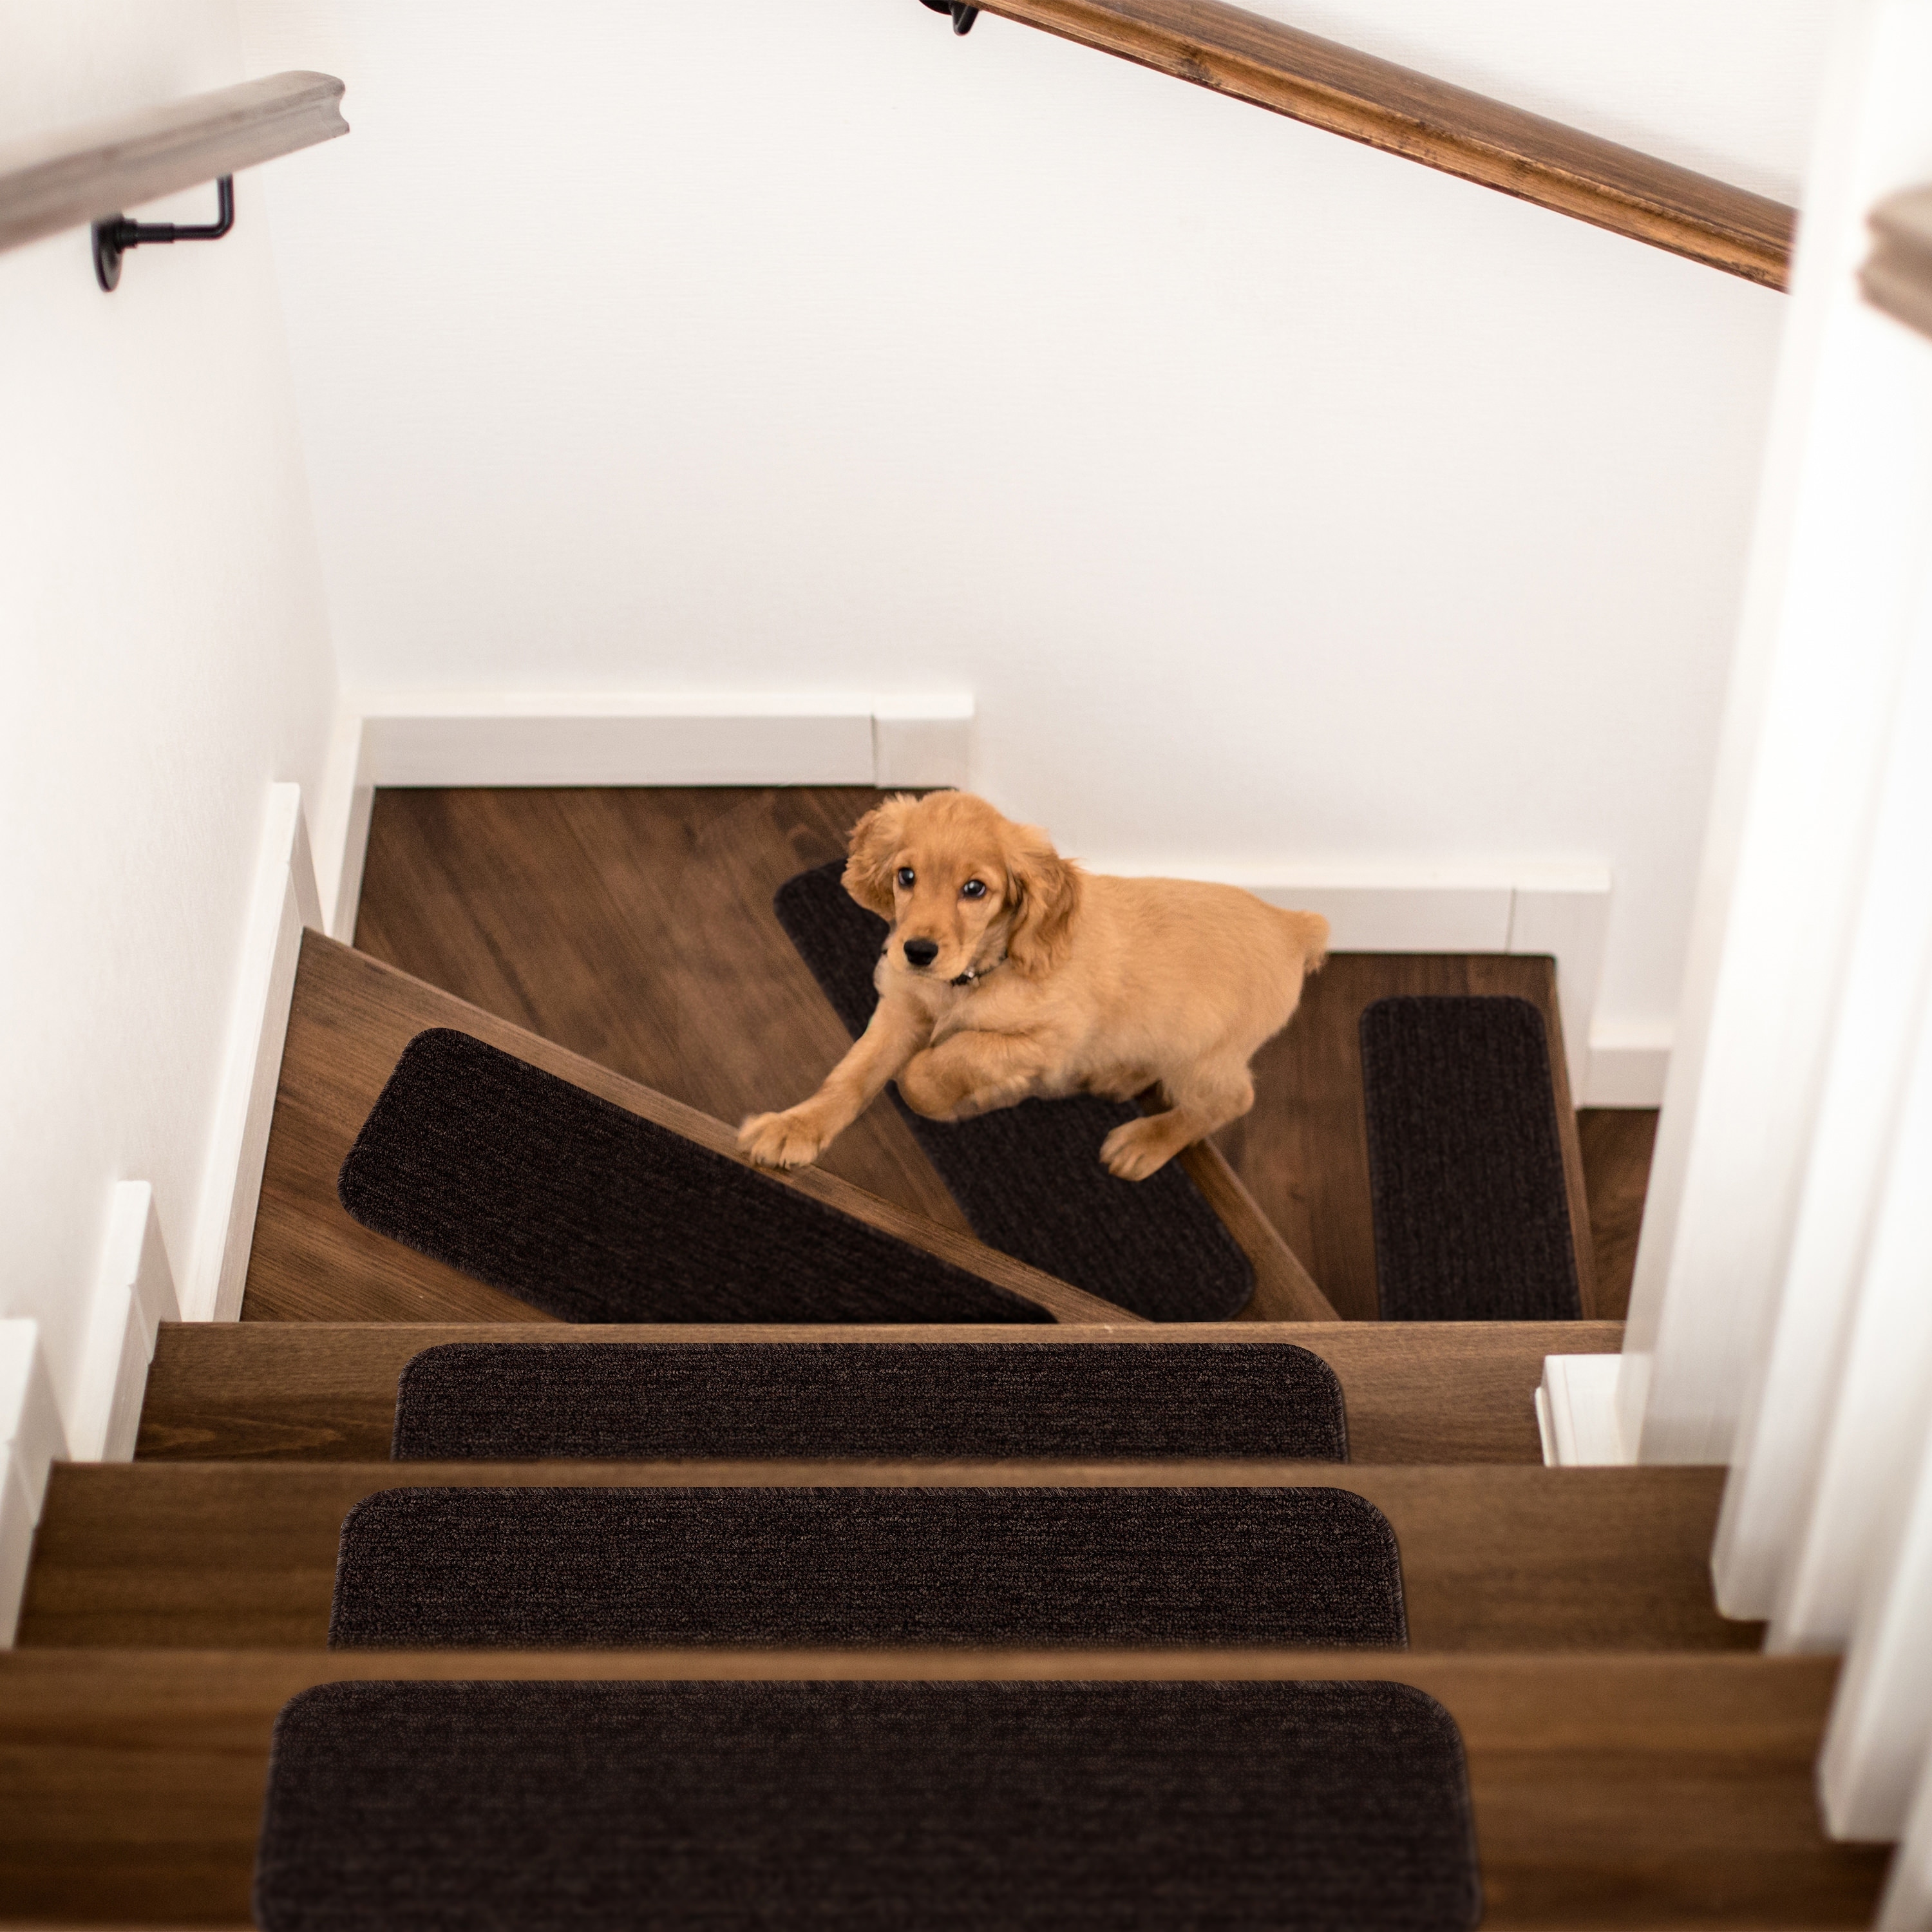 https://ak1.ostkcdn.com/images/products/is/images/direct/d644d7f26d351f9a1c44155b90f881e2f3d0a35c/Beverly-Rug-Non-Slip-Stair-Treads%2C-Matching-Landing-Rug%2C-Washable-Runner-Rug-for-Hallway.jpg